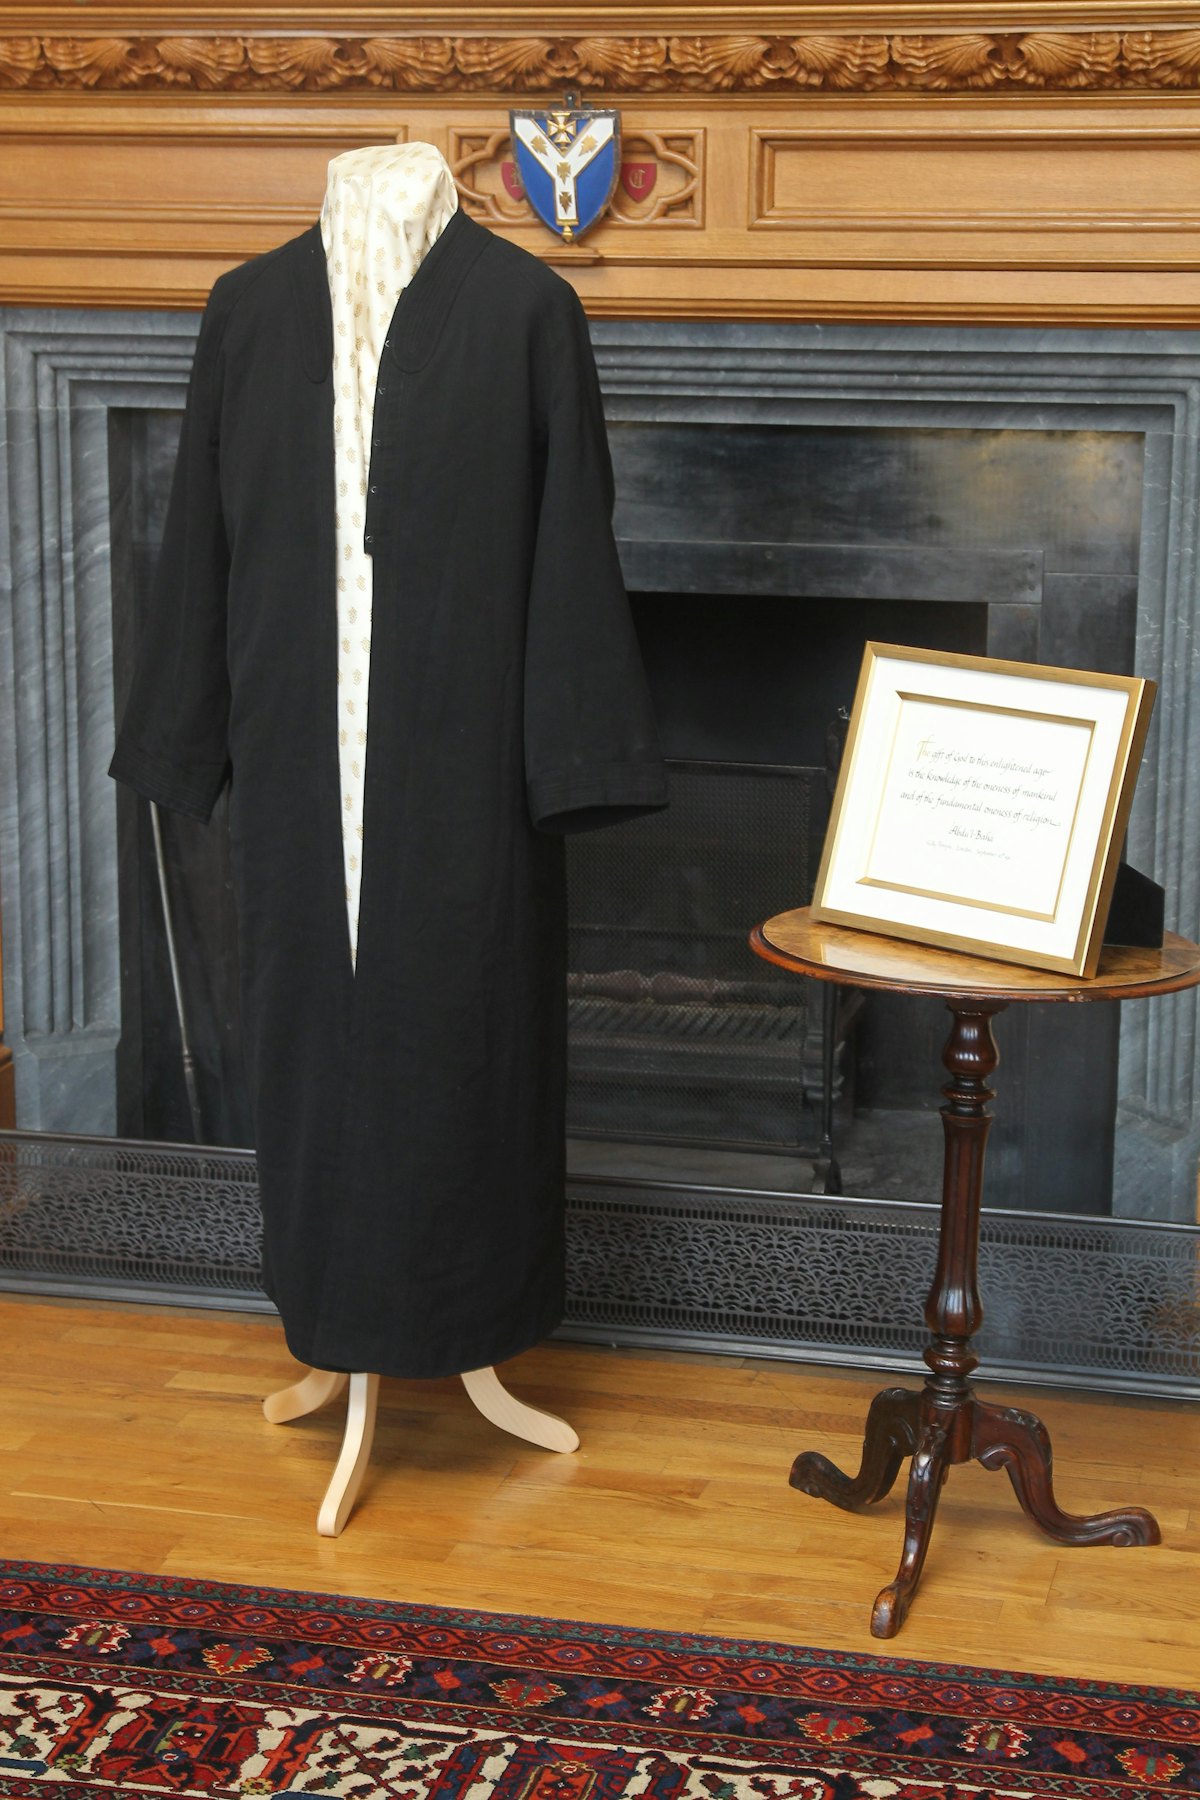 A robe worn by 'Abdu'l-Baha and a framed calligraphic rendering of words from His first ever public speech, delivered on 10 September 1911 at London's City Temple: "The gift of God to this enlightened age is the knowledge of the oneness of mankind and of the fundamental oneness of religion." The historic items were exhibited at a reception held at Lambeth Palace to mark the Diamond Jubilee of Her Majesty Queen Elizabeth II.